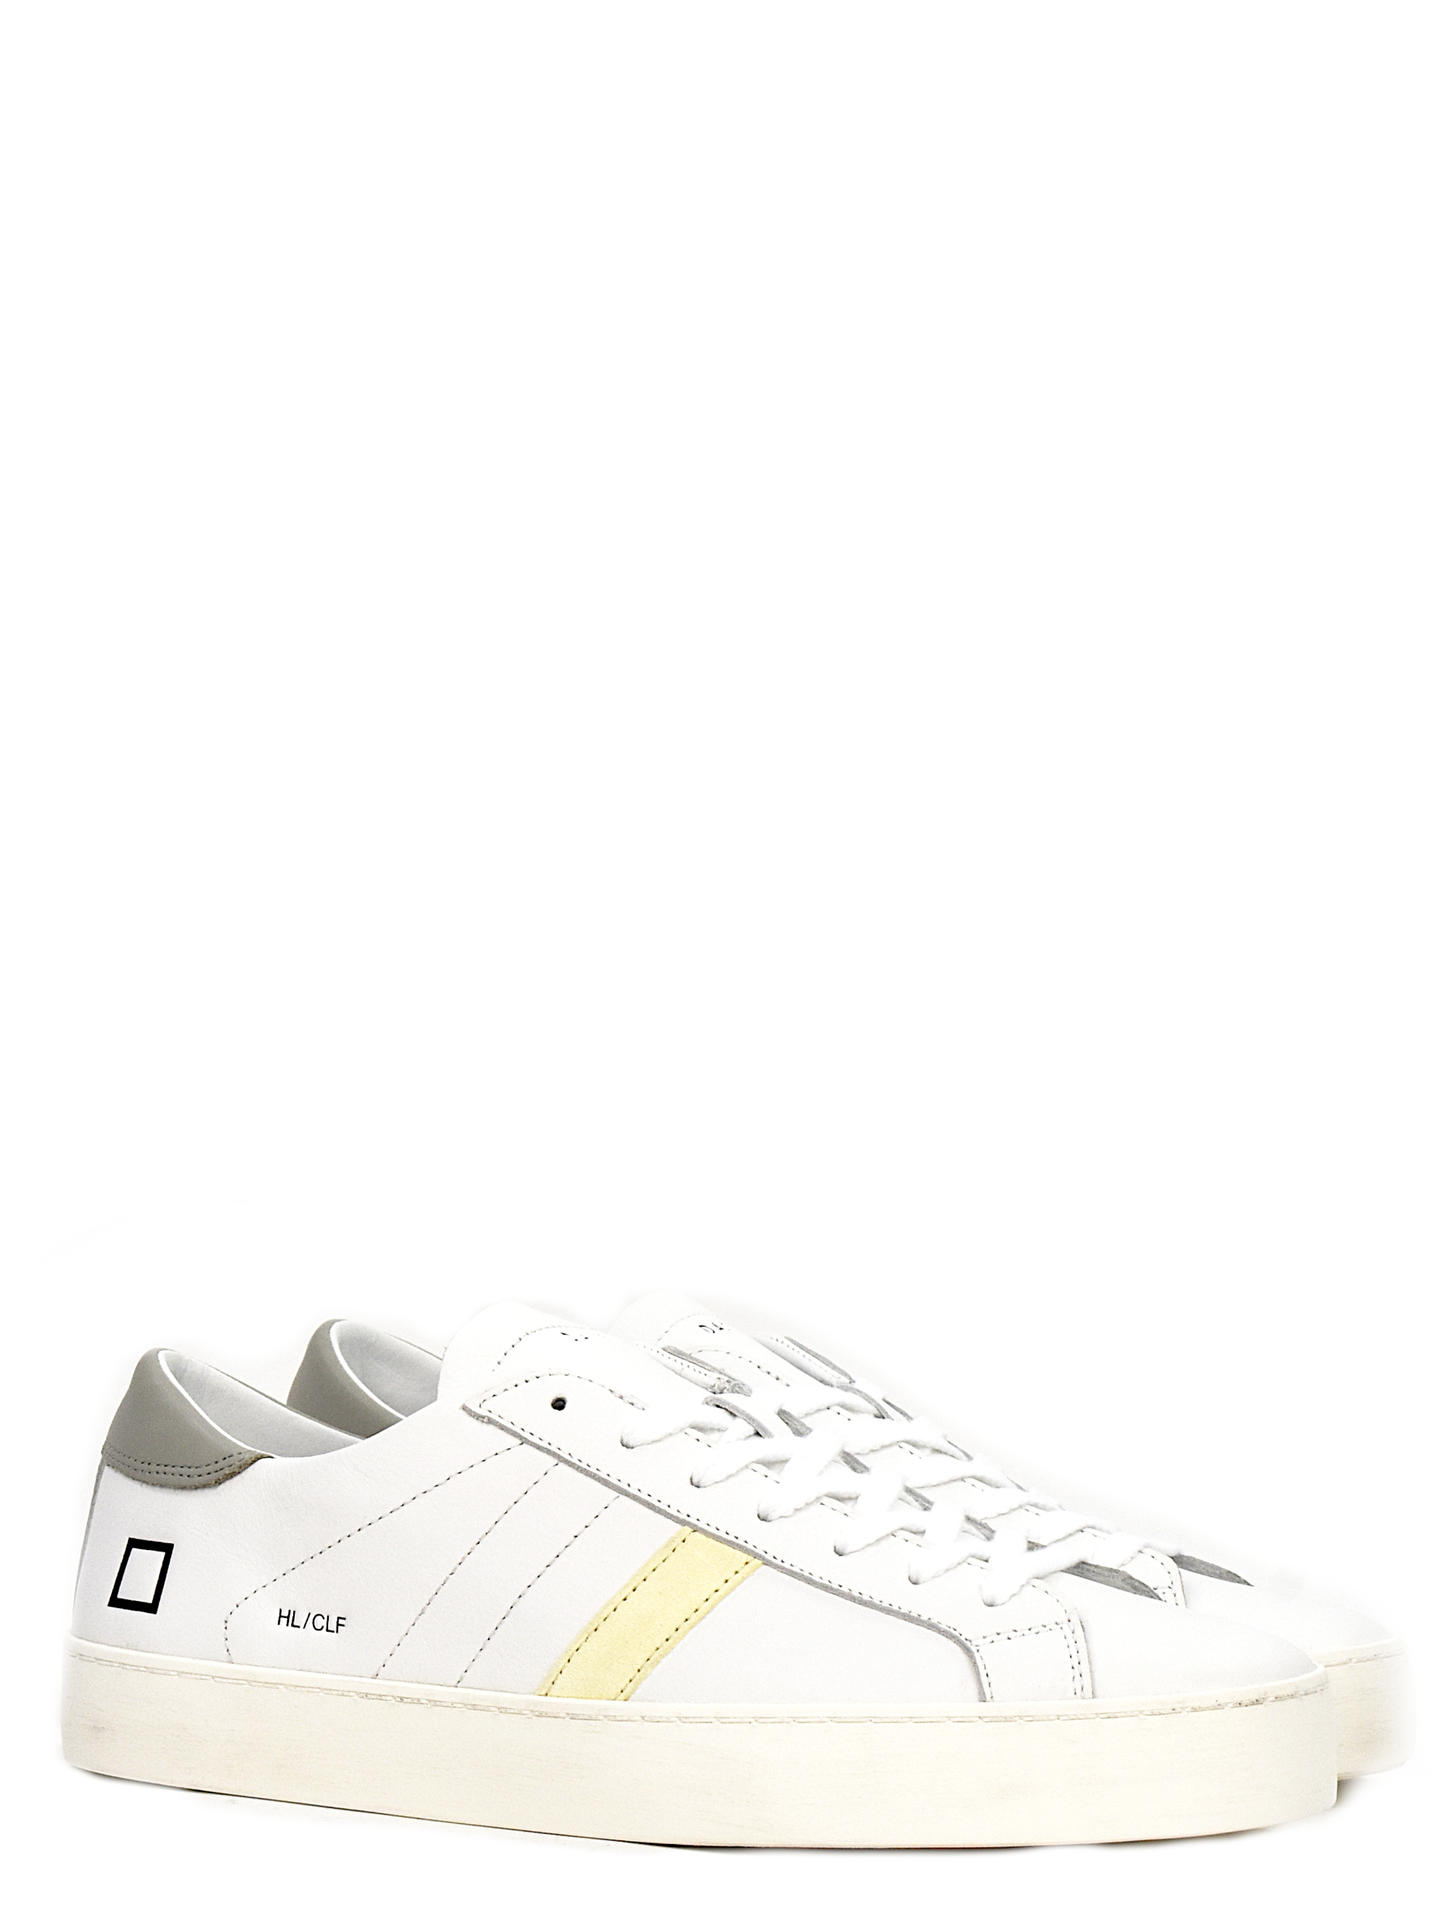 SNEAKERS D.A.T.E HLCAHA BIANCO